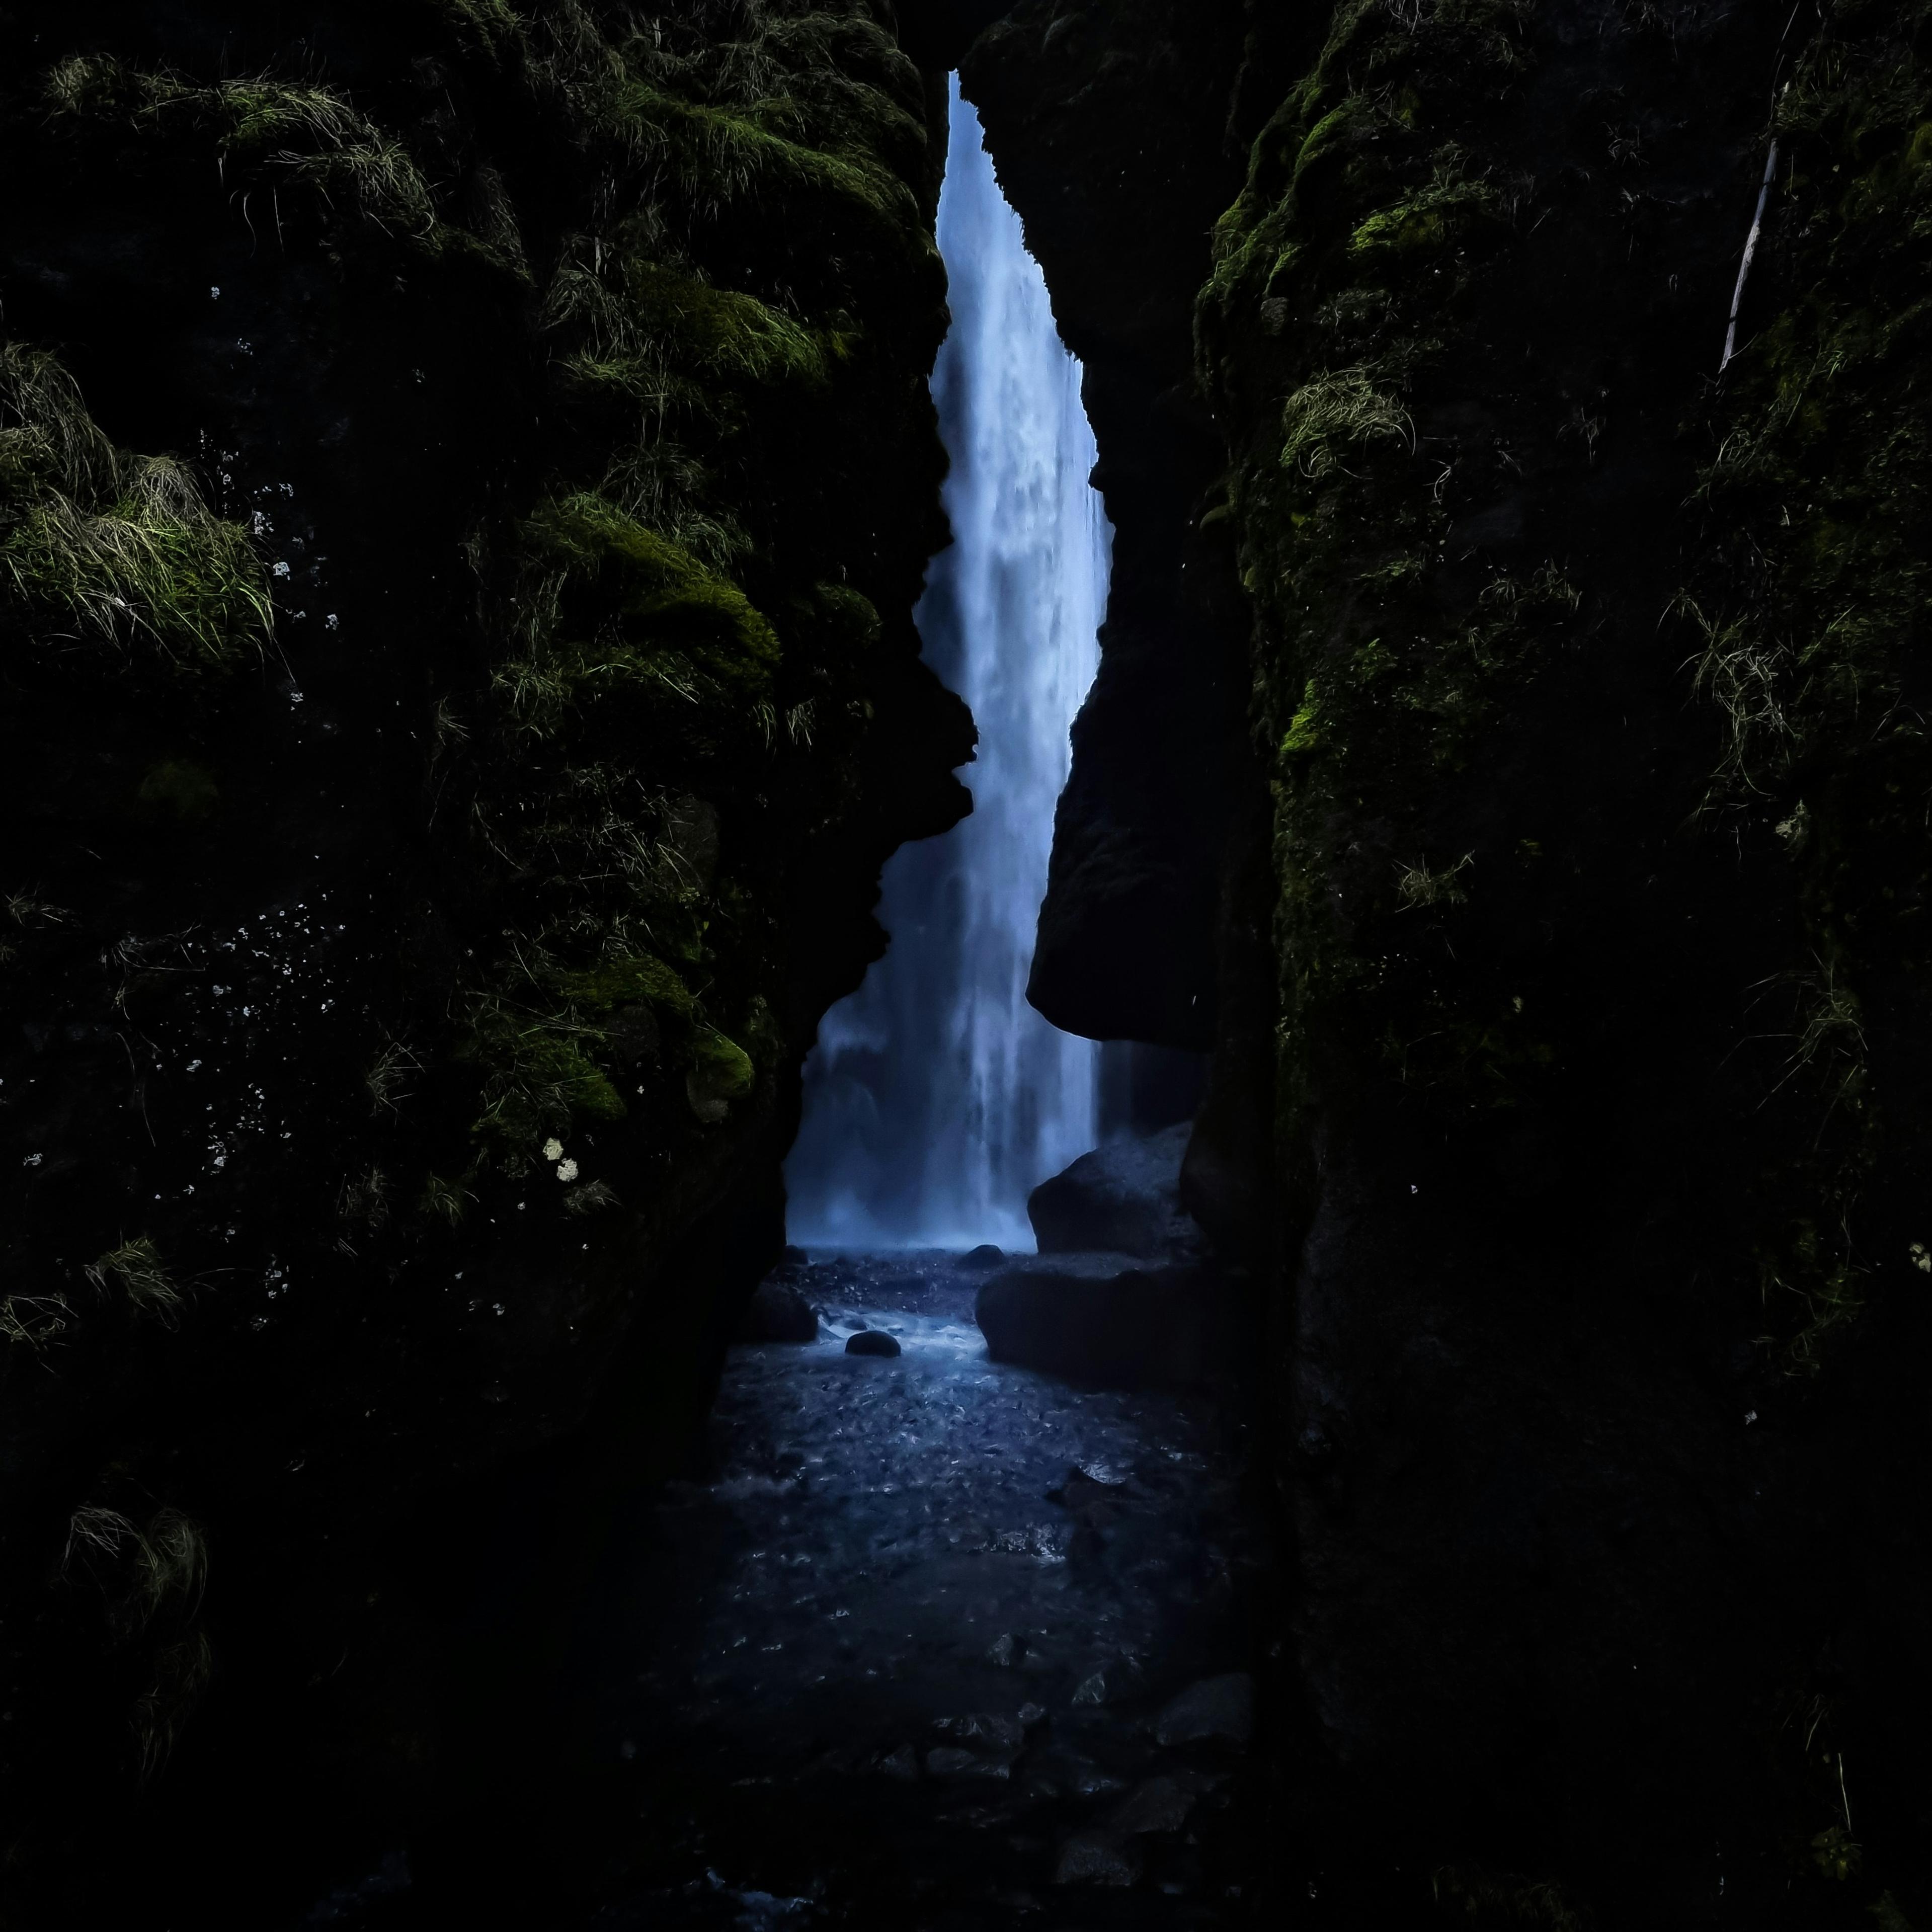 A hidden waterfall cascading down in a dark, moss-covered gorge creating a mystical and secluded atmosphere.